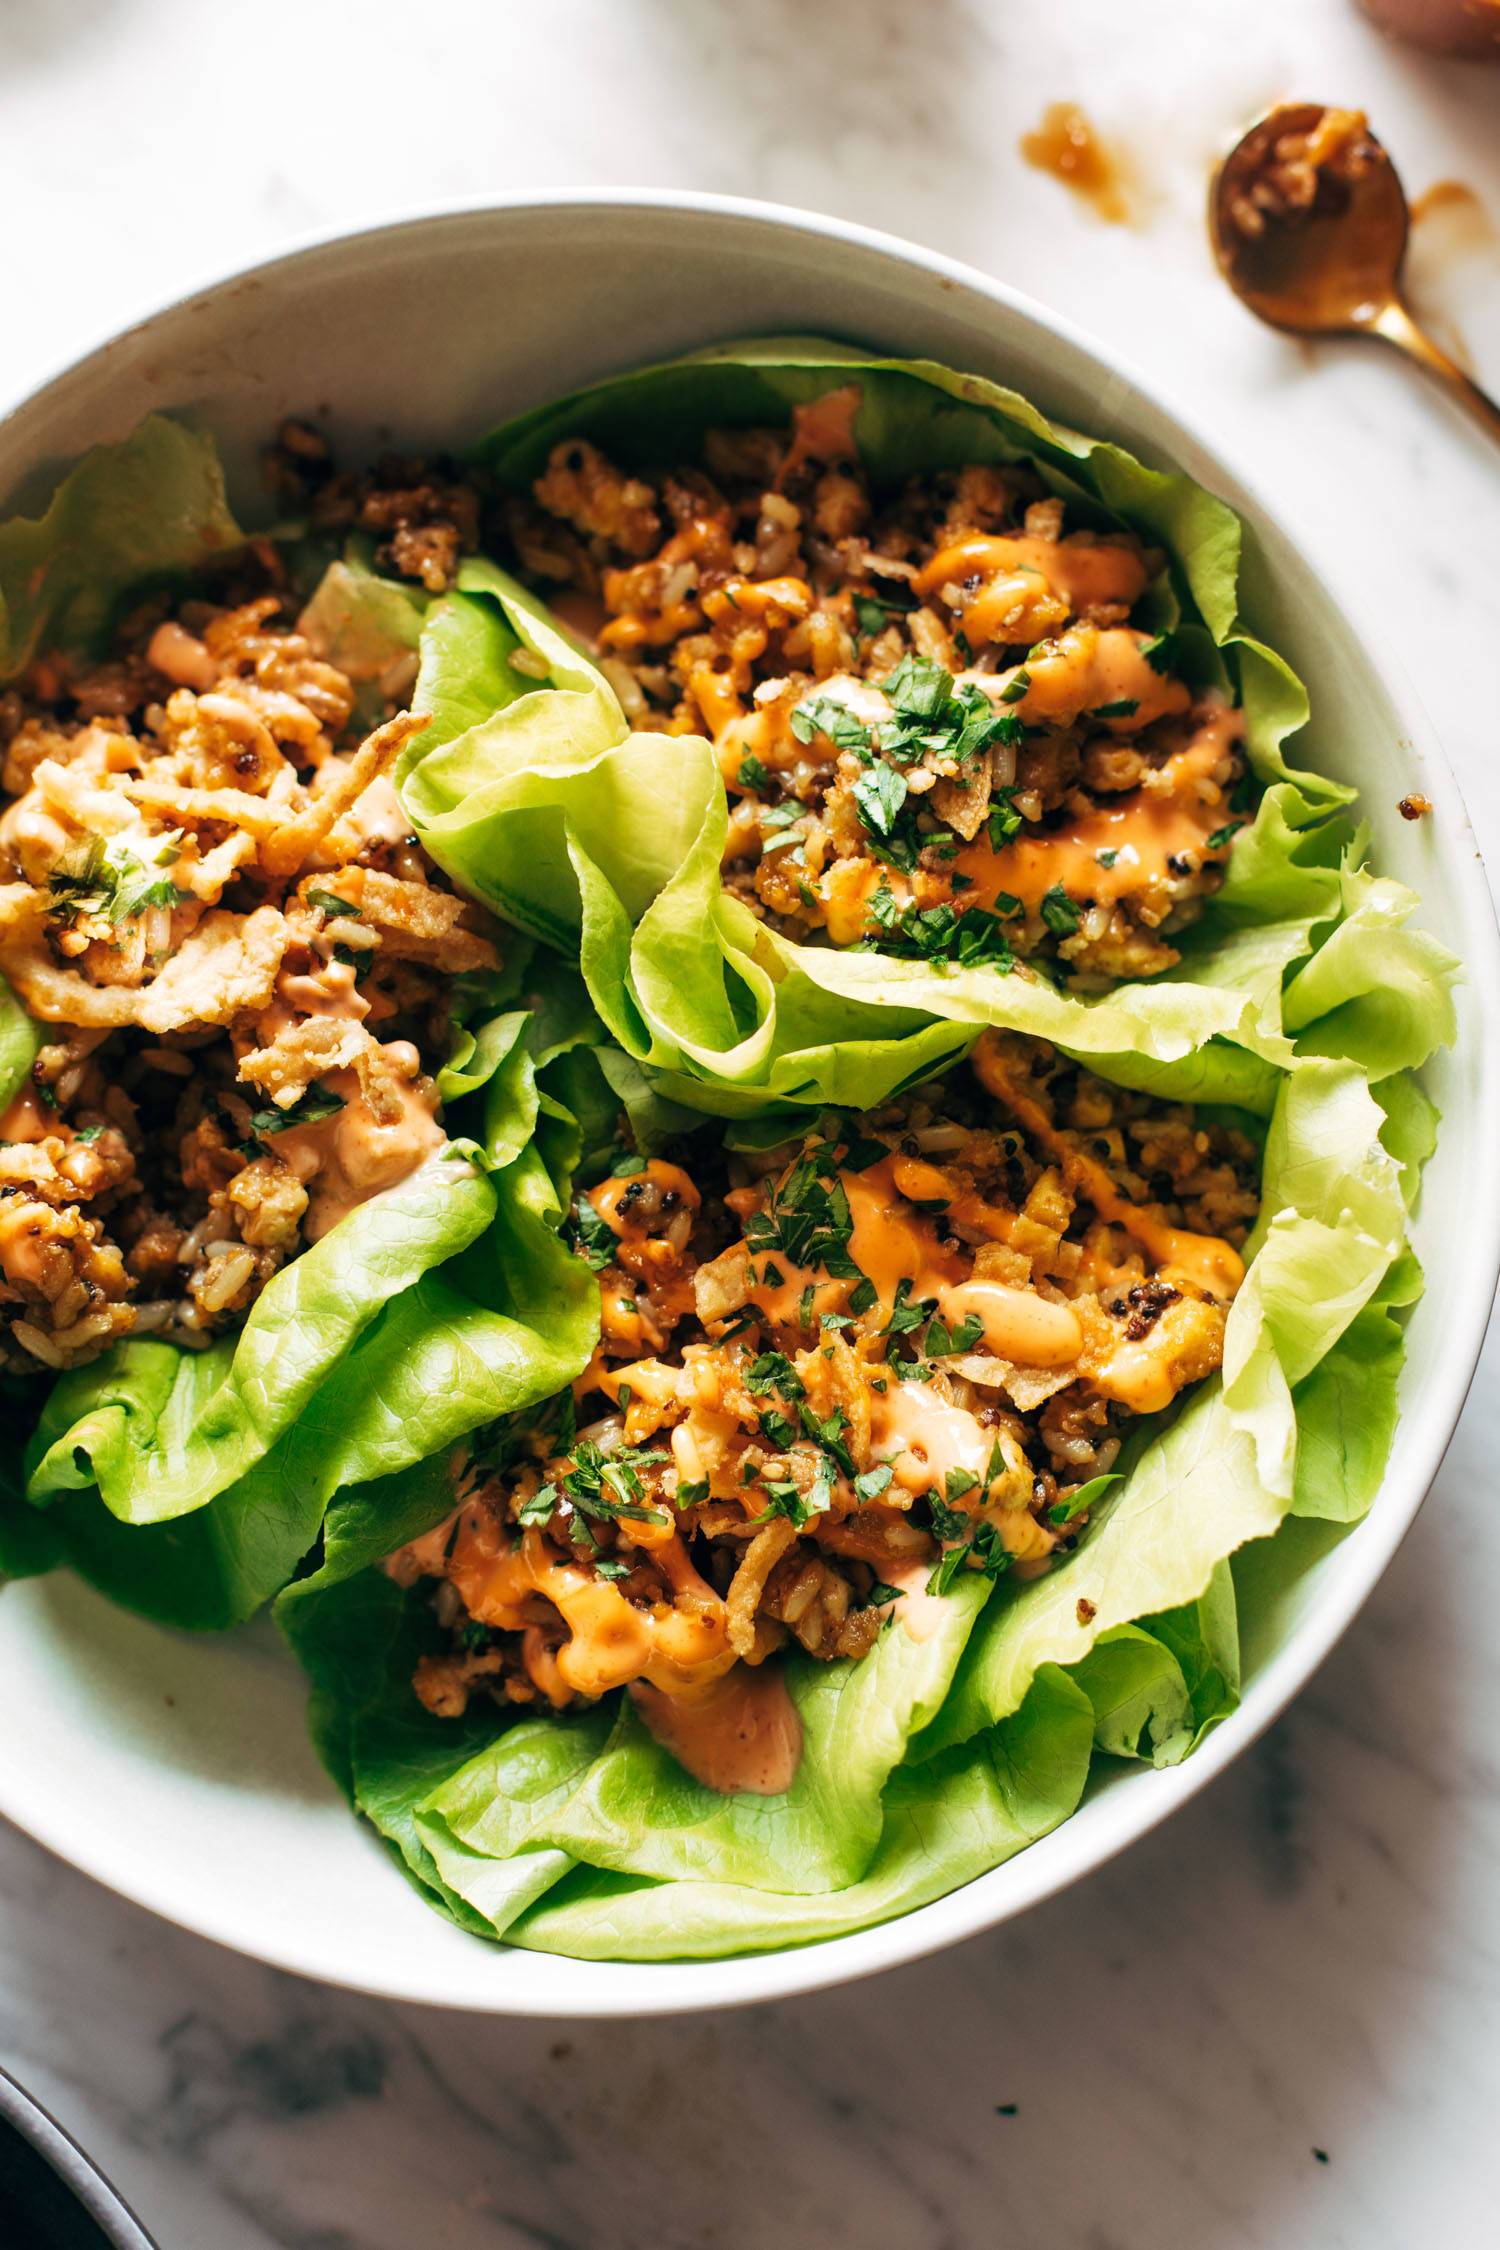 Tofu and Brown Rice Lettuce Wraps with Peanut Sauce via Pinch of Yum